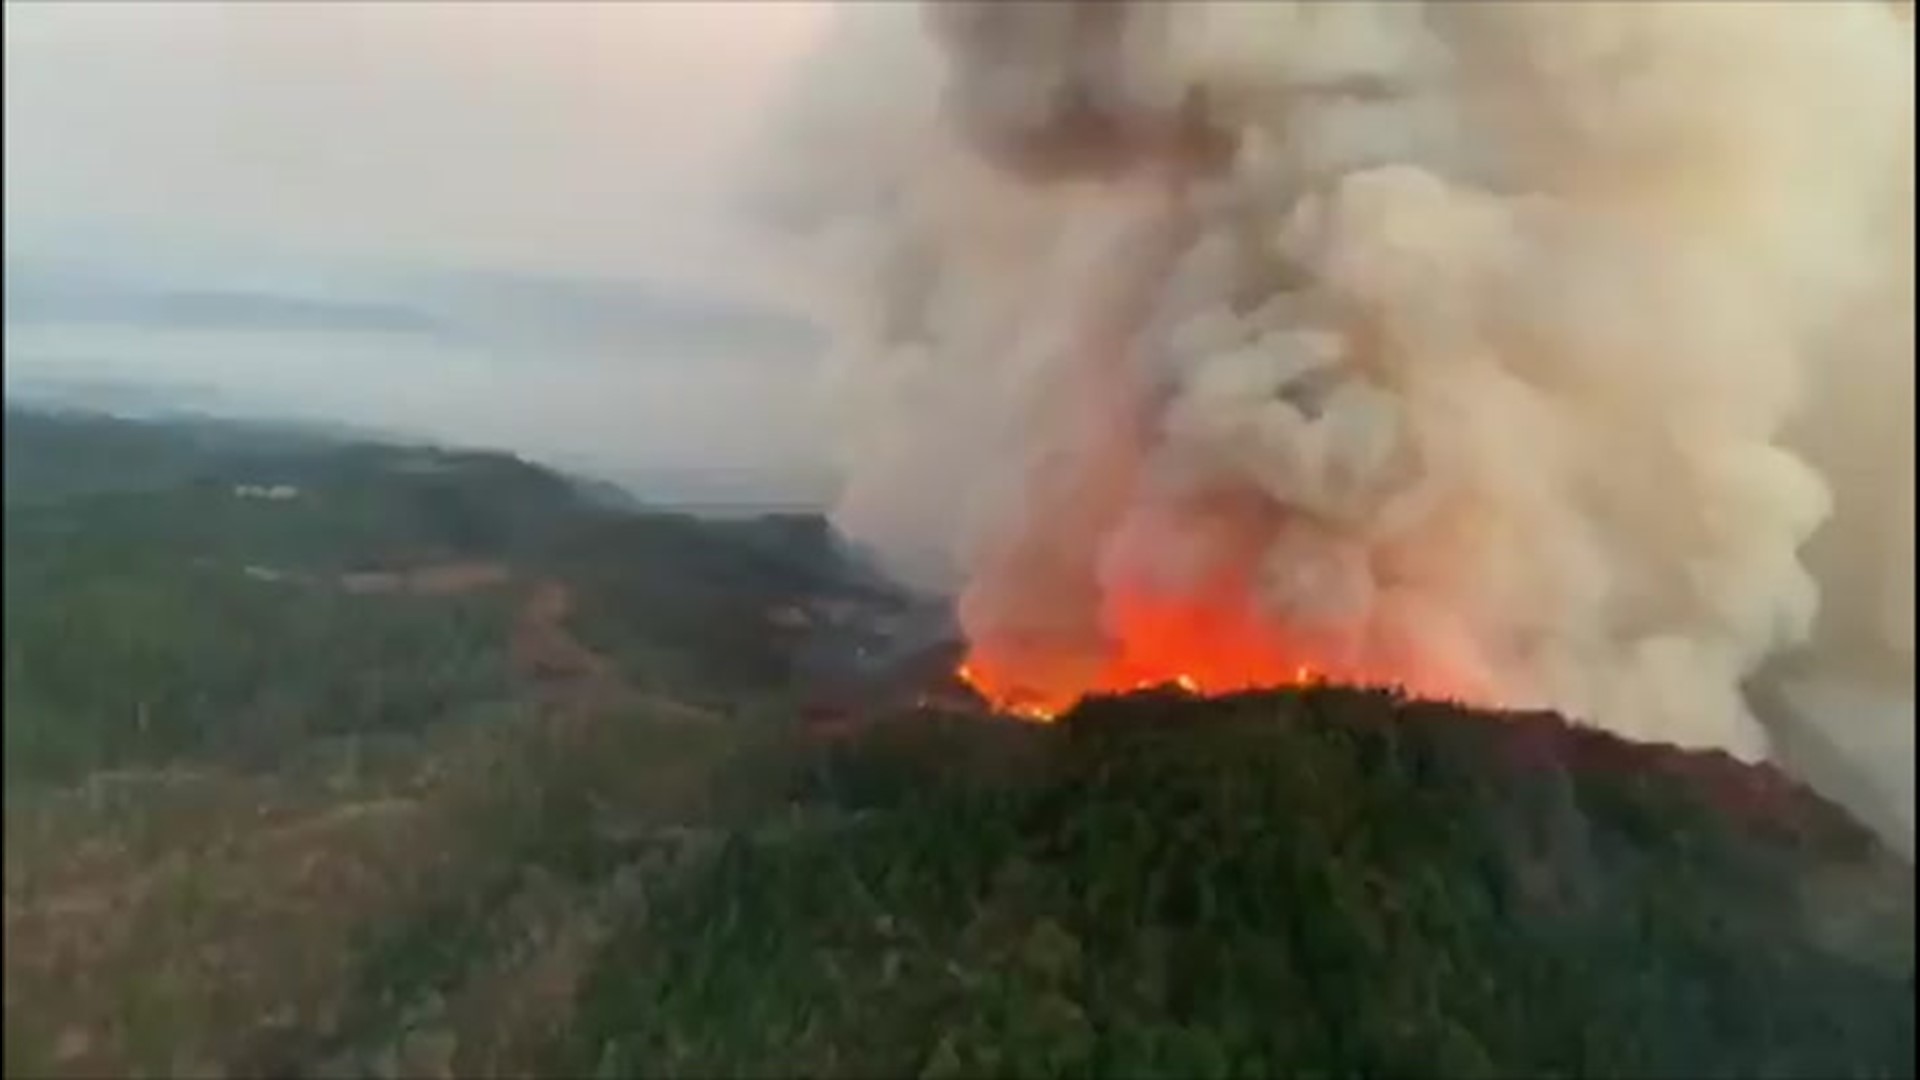 Aerial footage captured near Angwin, California, shows the Glass Fire raging on a mountaintop on Sept. 28. The fire started on Sept. 27 and has quickly grown to a size of more than 36,000 acres.